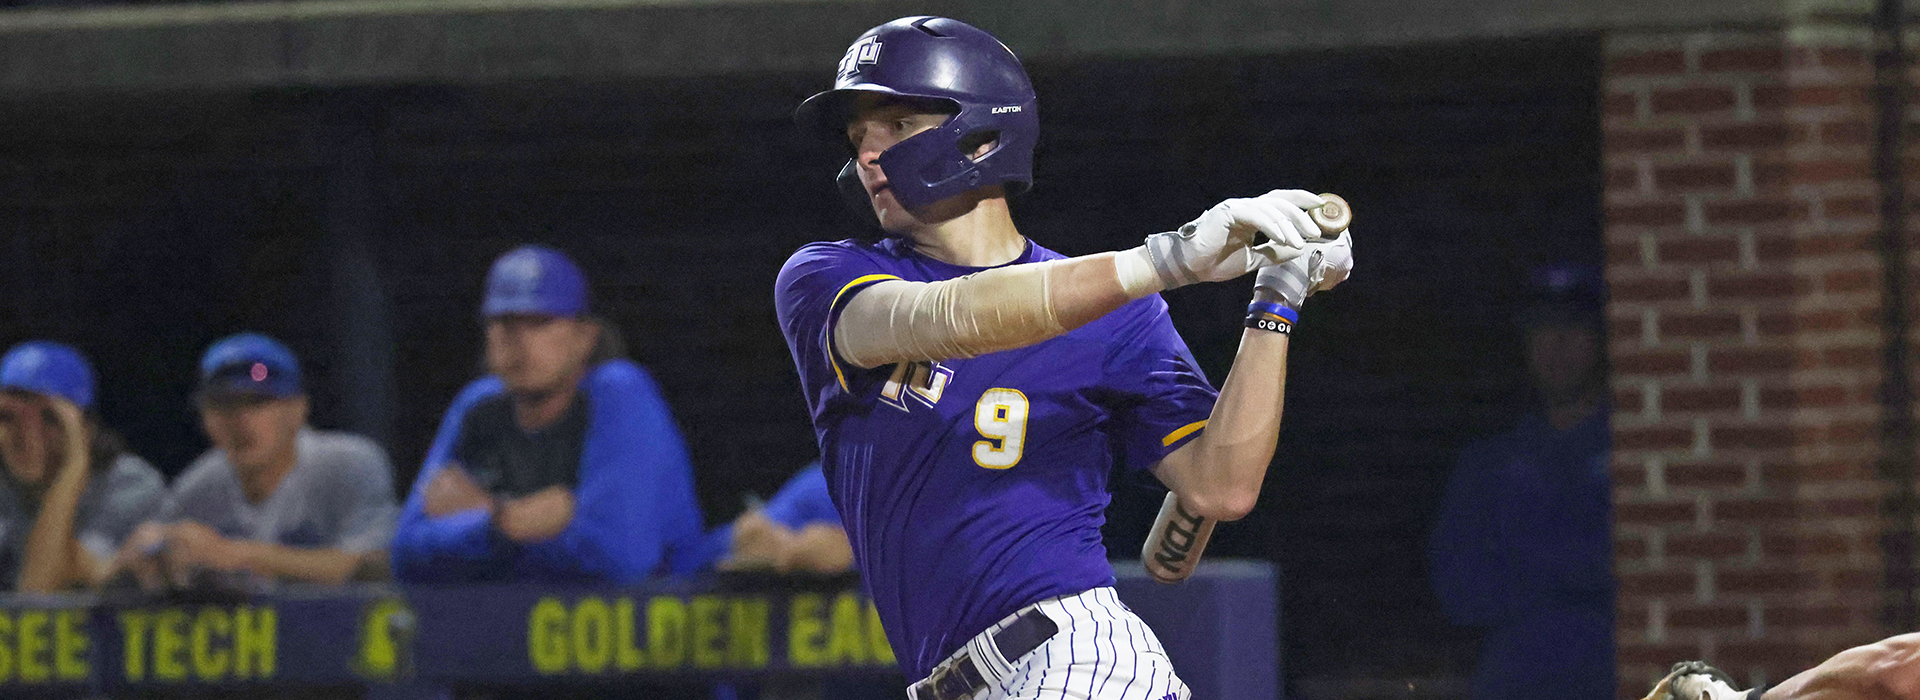 Golden Eagles fall at in-state rival Lipscomb